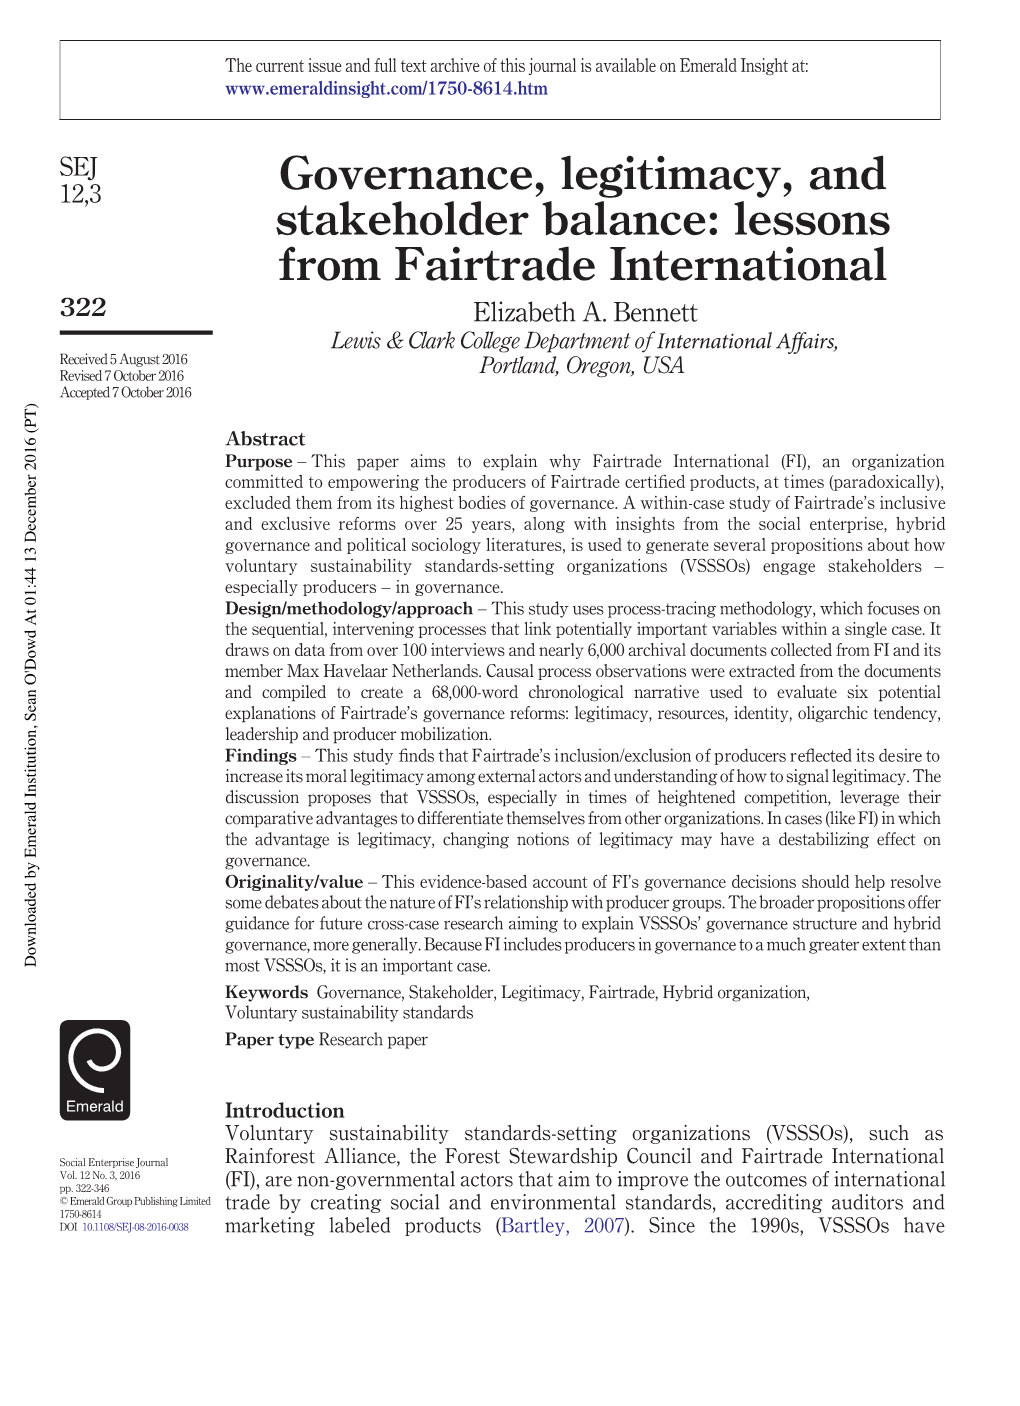 Governance, Legitimacy, and Stakeholder Balance: Lessons From